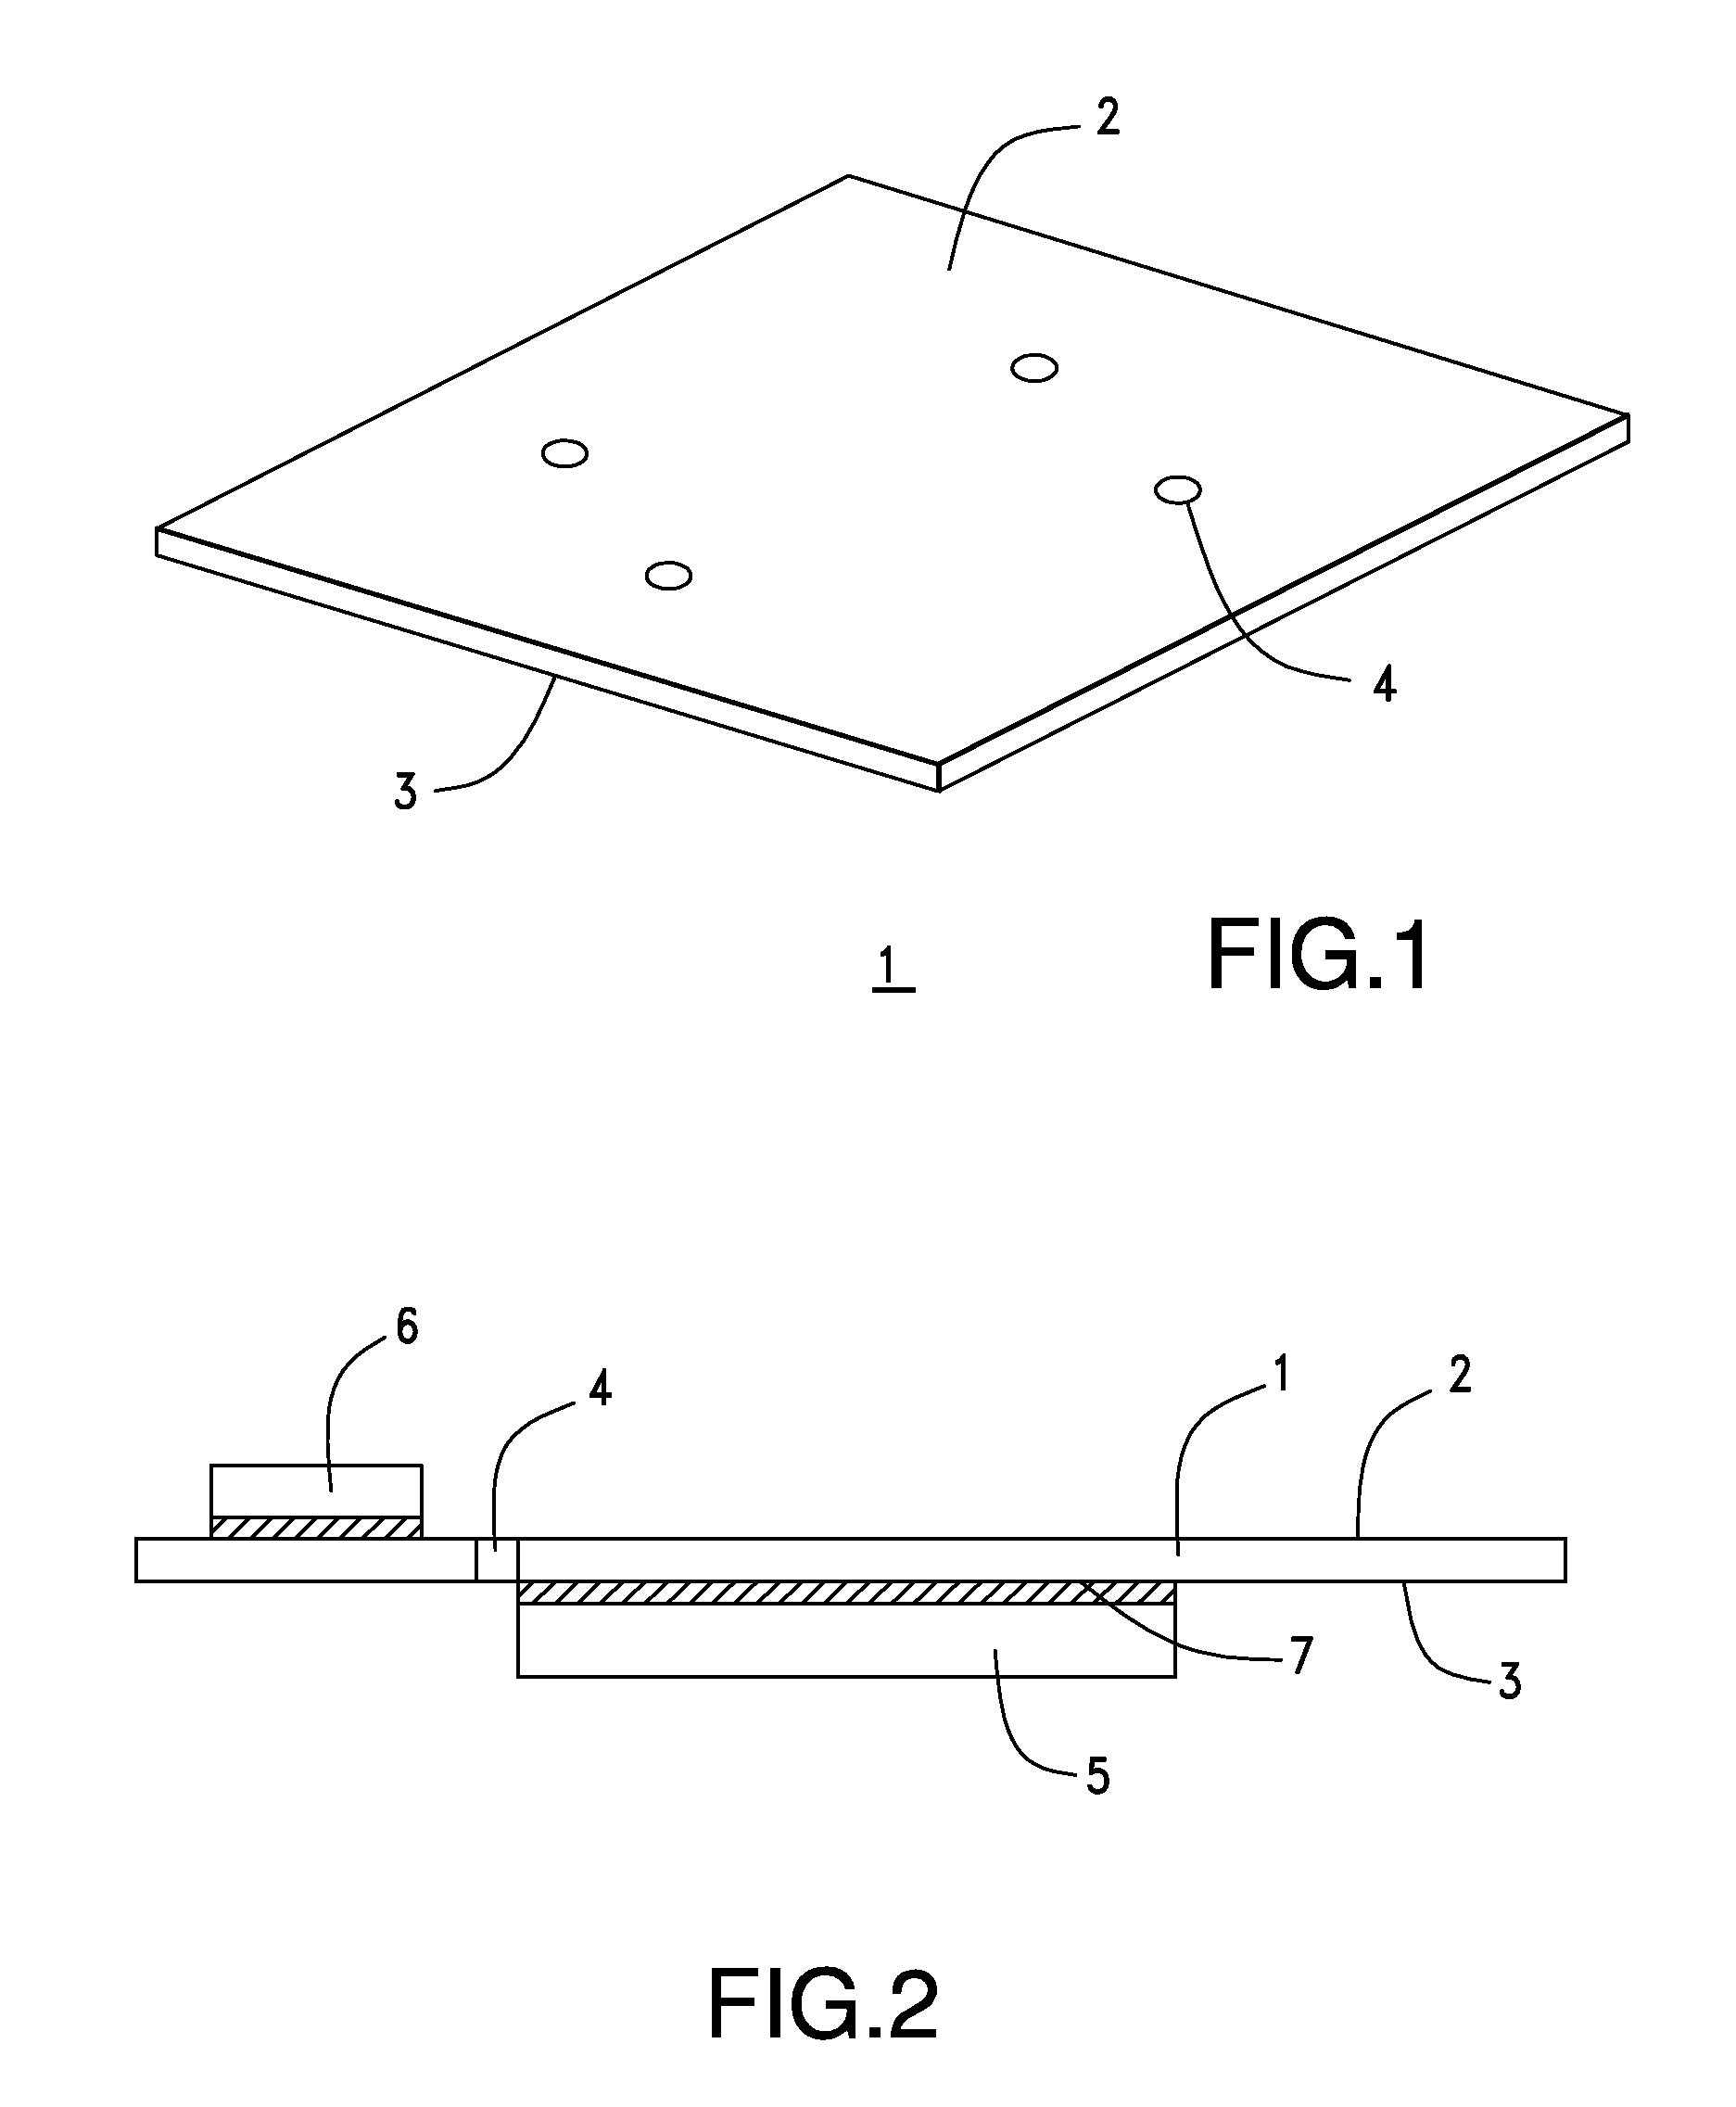 Heat pipe and circuit board with a heat pipe function